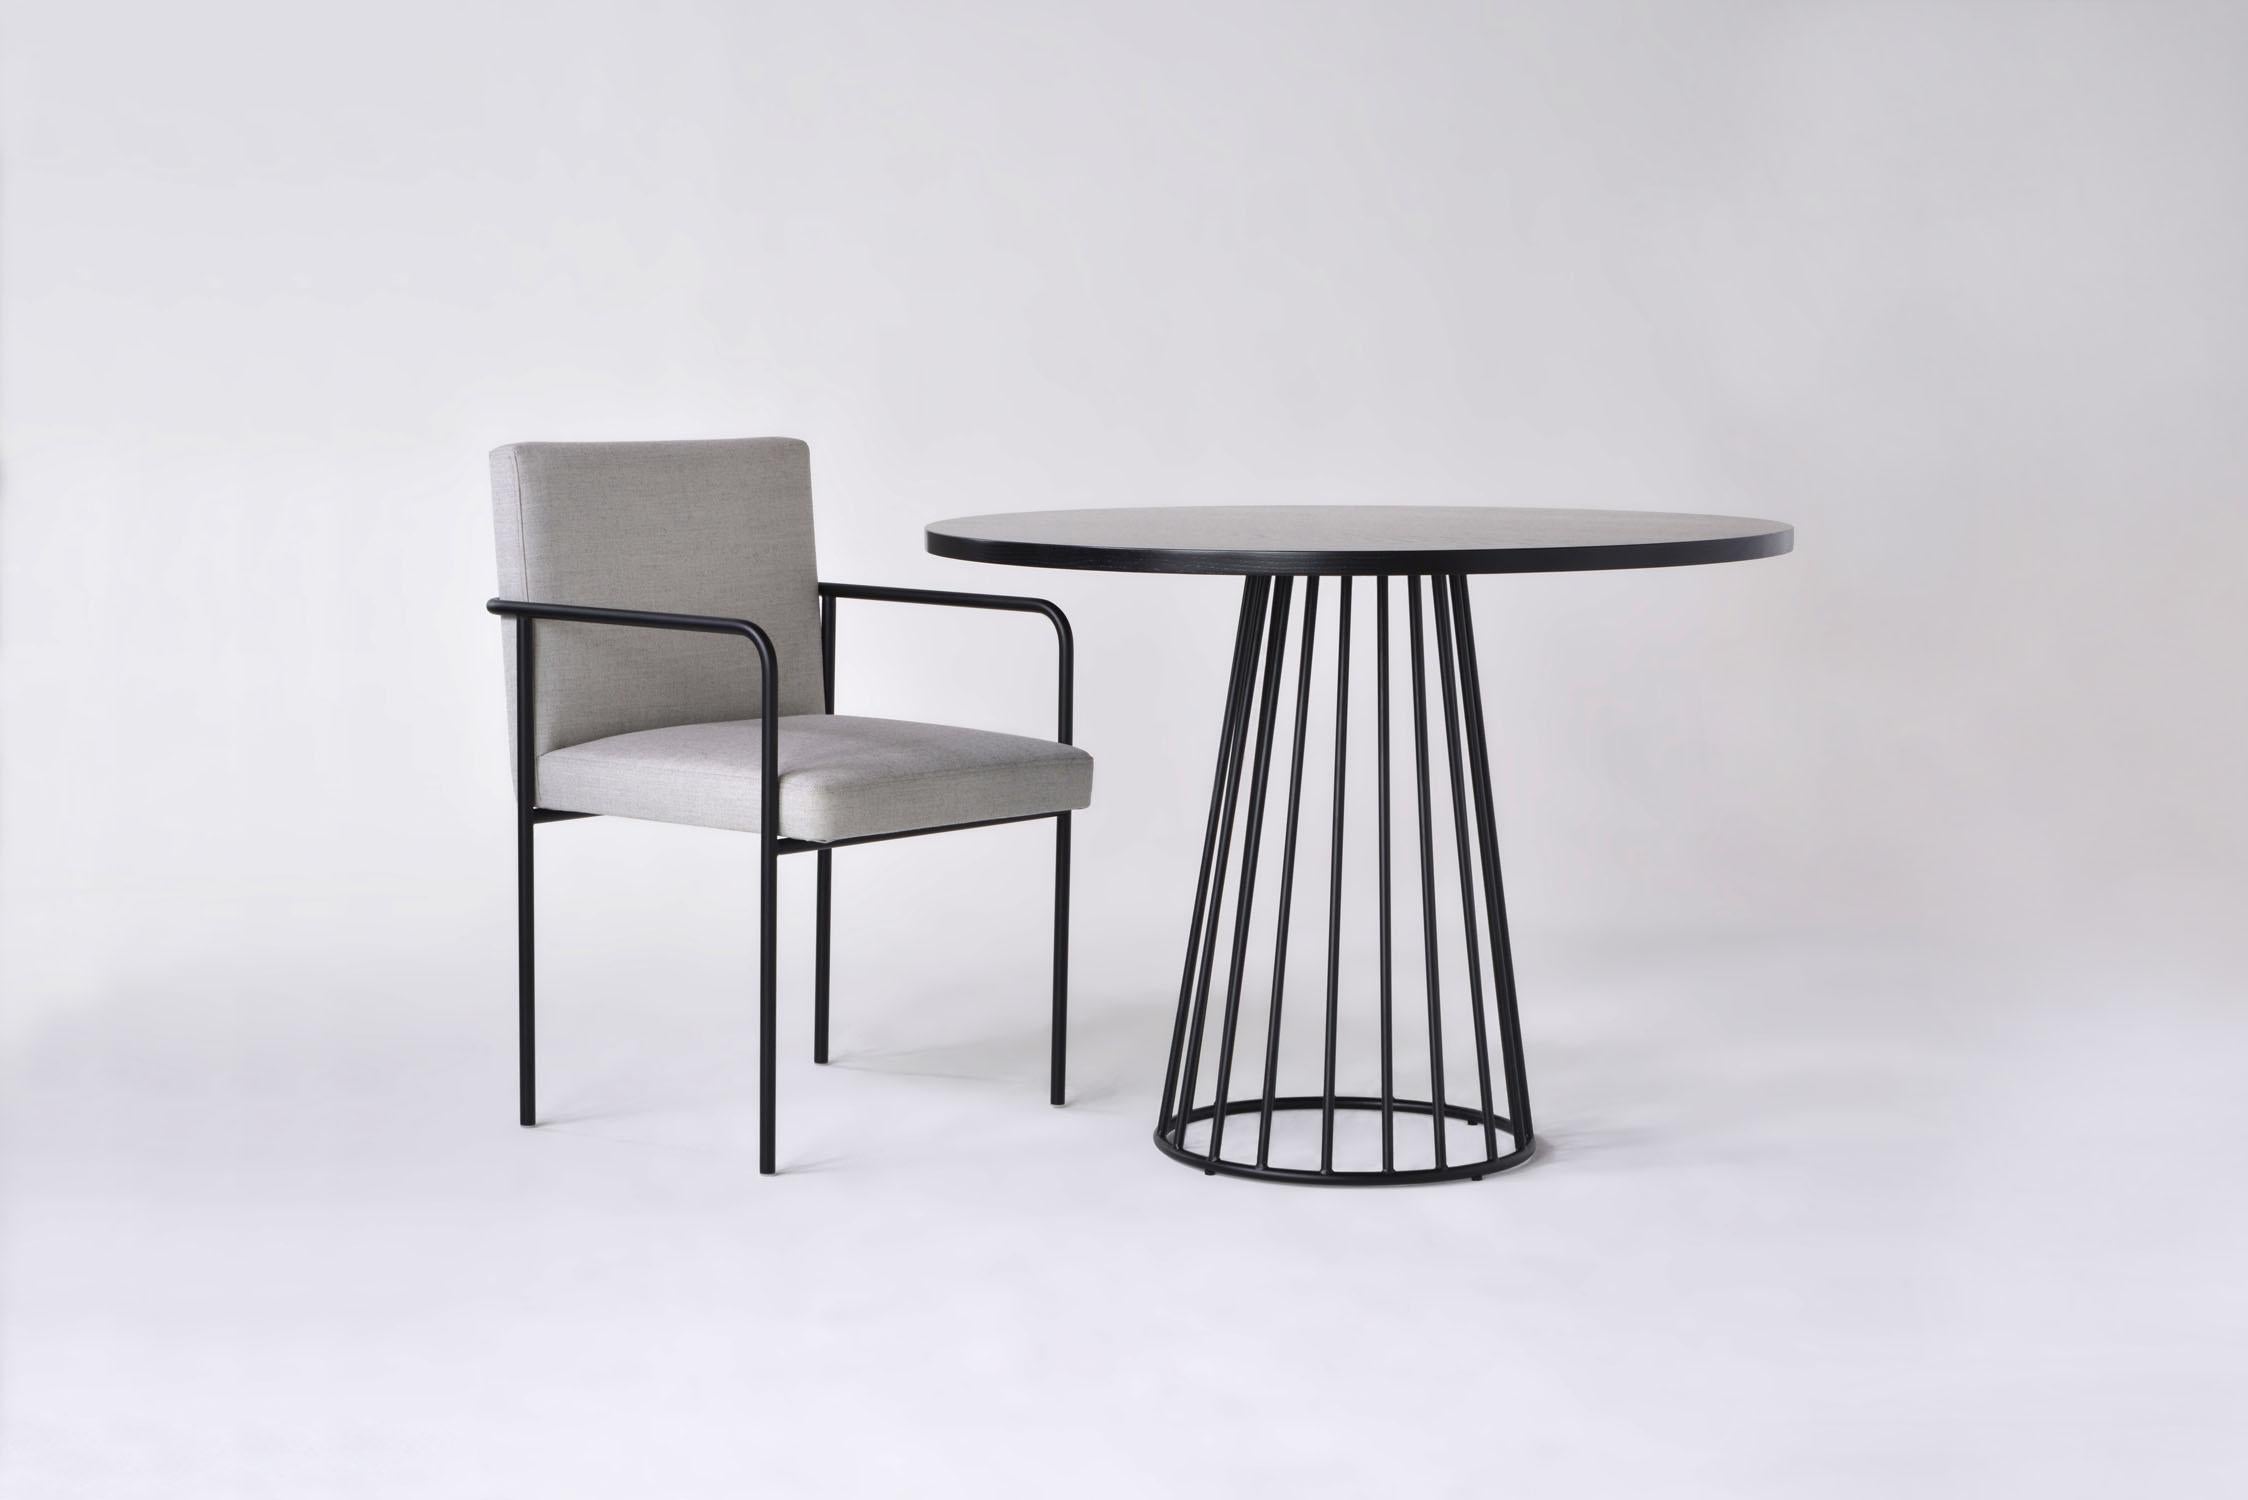 Listed price is for the Wired Cafe Table with a Flat Black or Flat White base in either walnut, white oak, or ebonized oak. 

Prices exclude packing.

Tapered lengths of metal meet with intention in a modern interpretation of the wiry idea